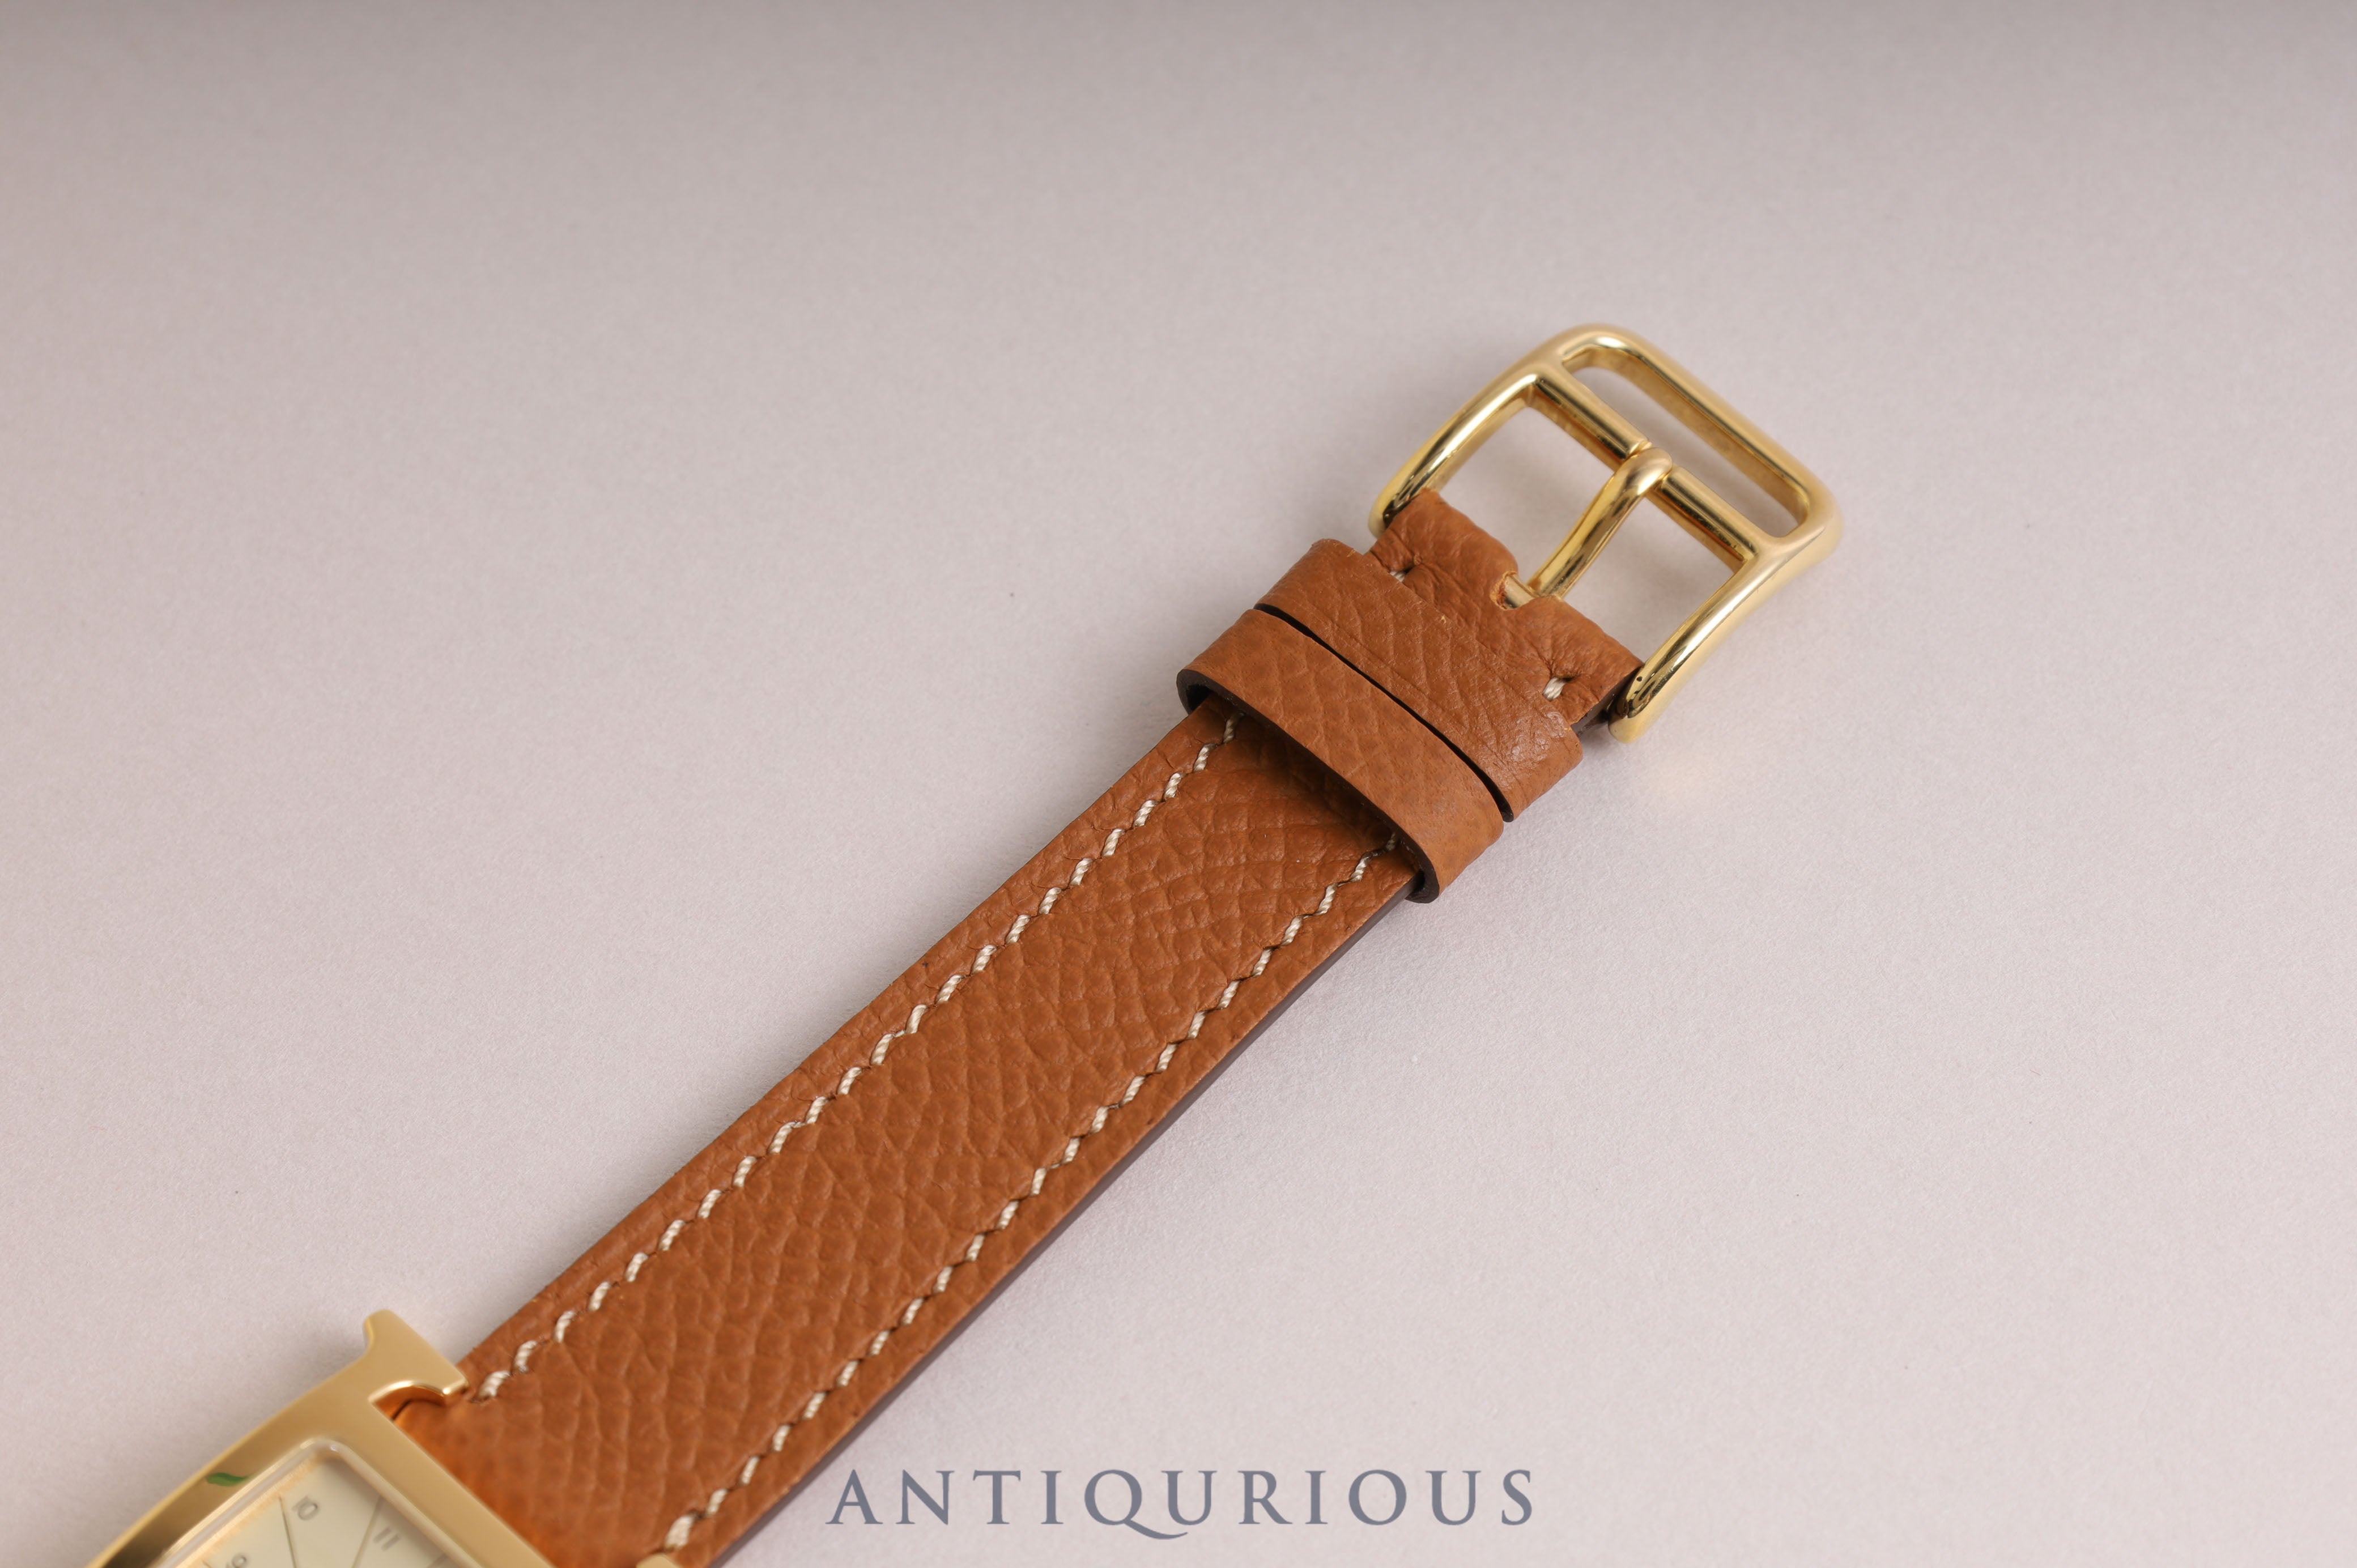 HERMES H watch RS1.201